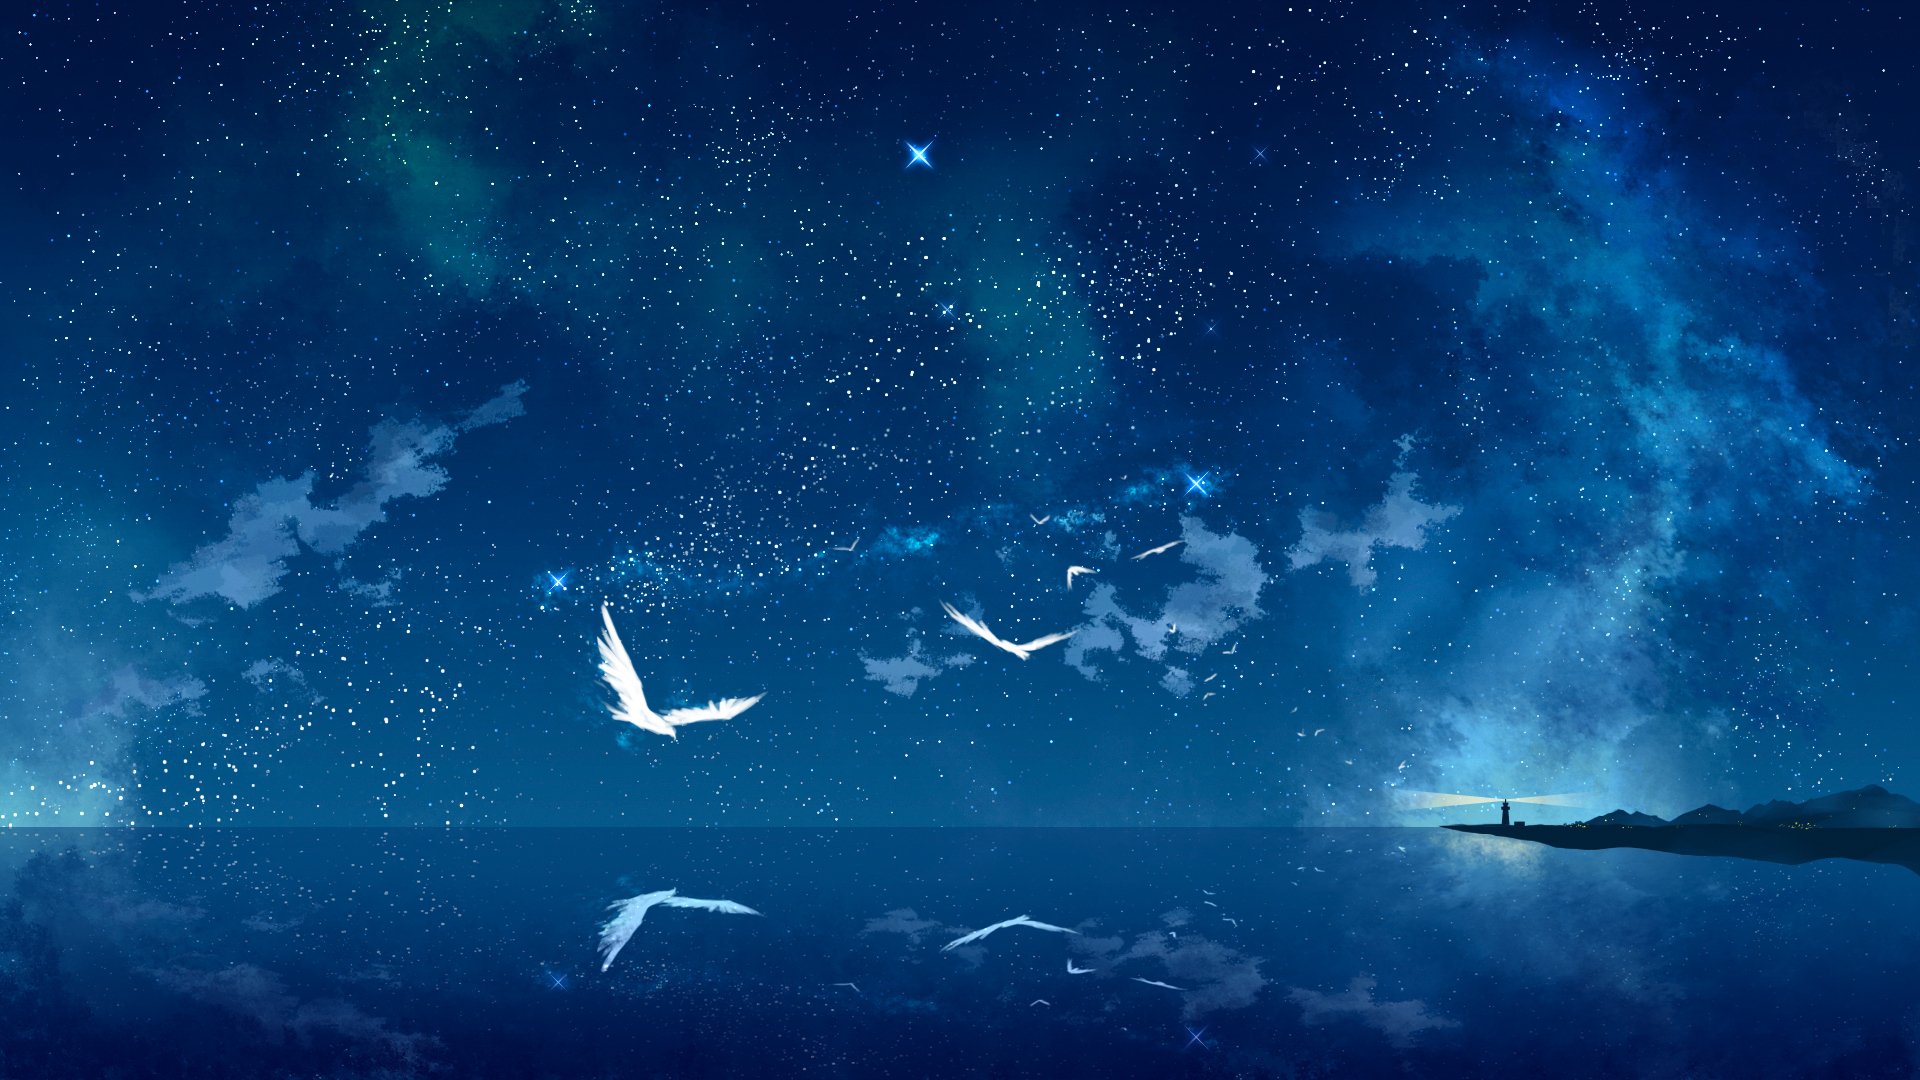 243 Starry Sky HD Wallpapers | Backgrounds - Wallpaper Abyss